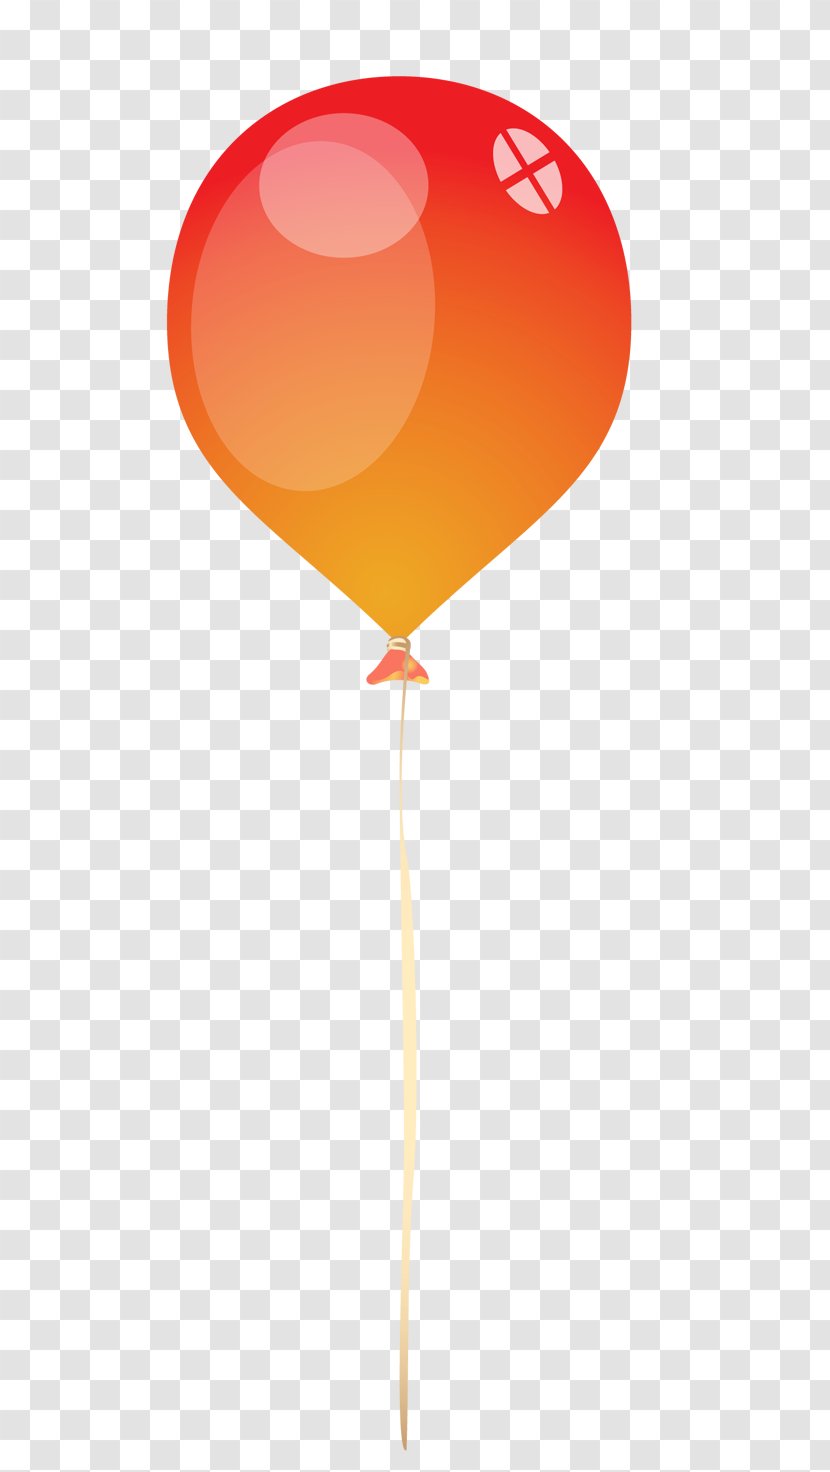 Toy Balloon Photography Clip Art Transparent PNG